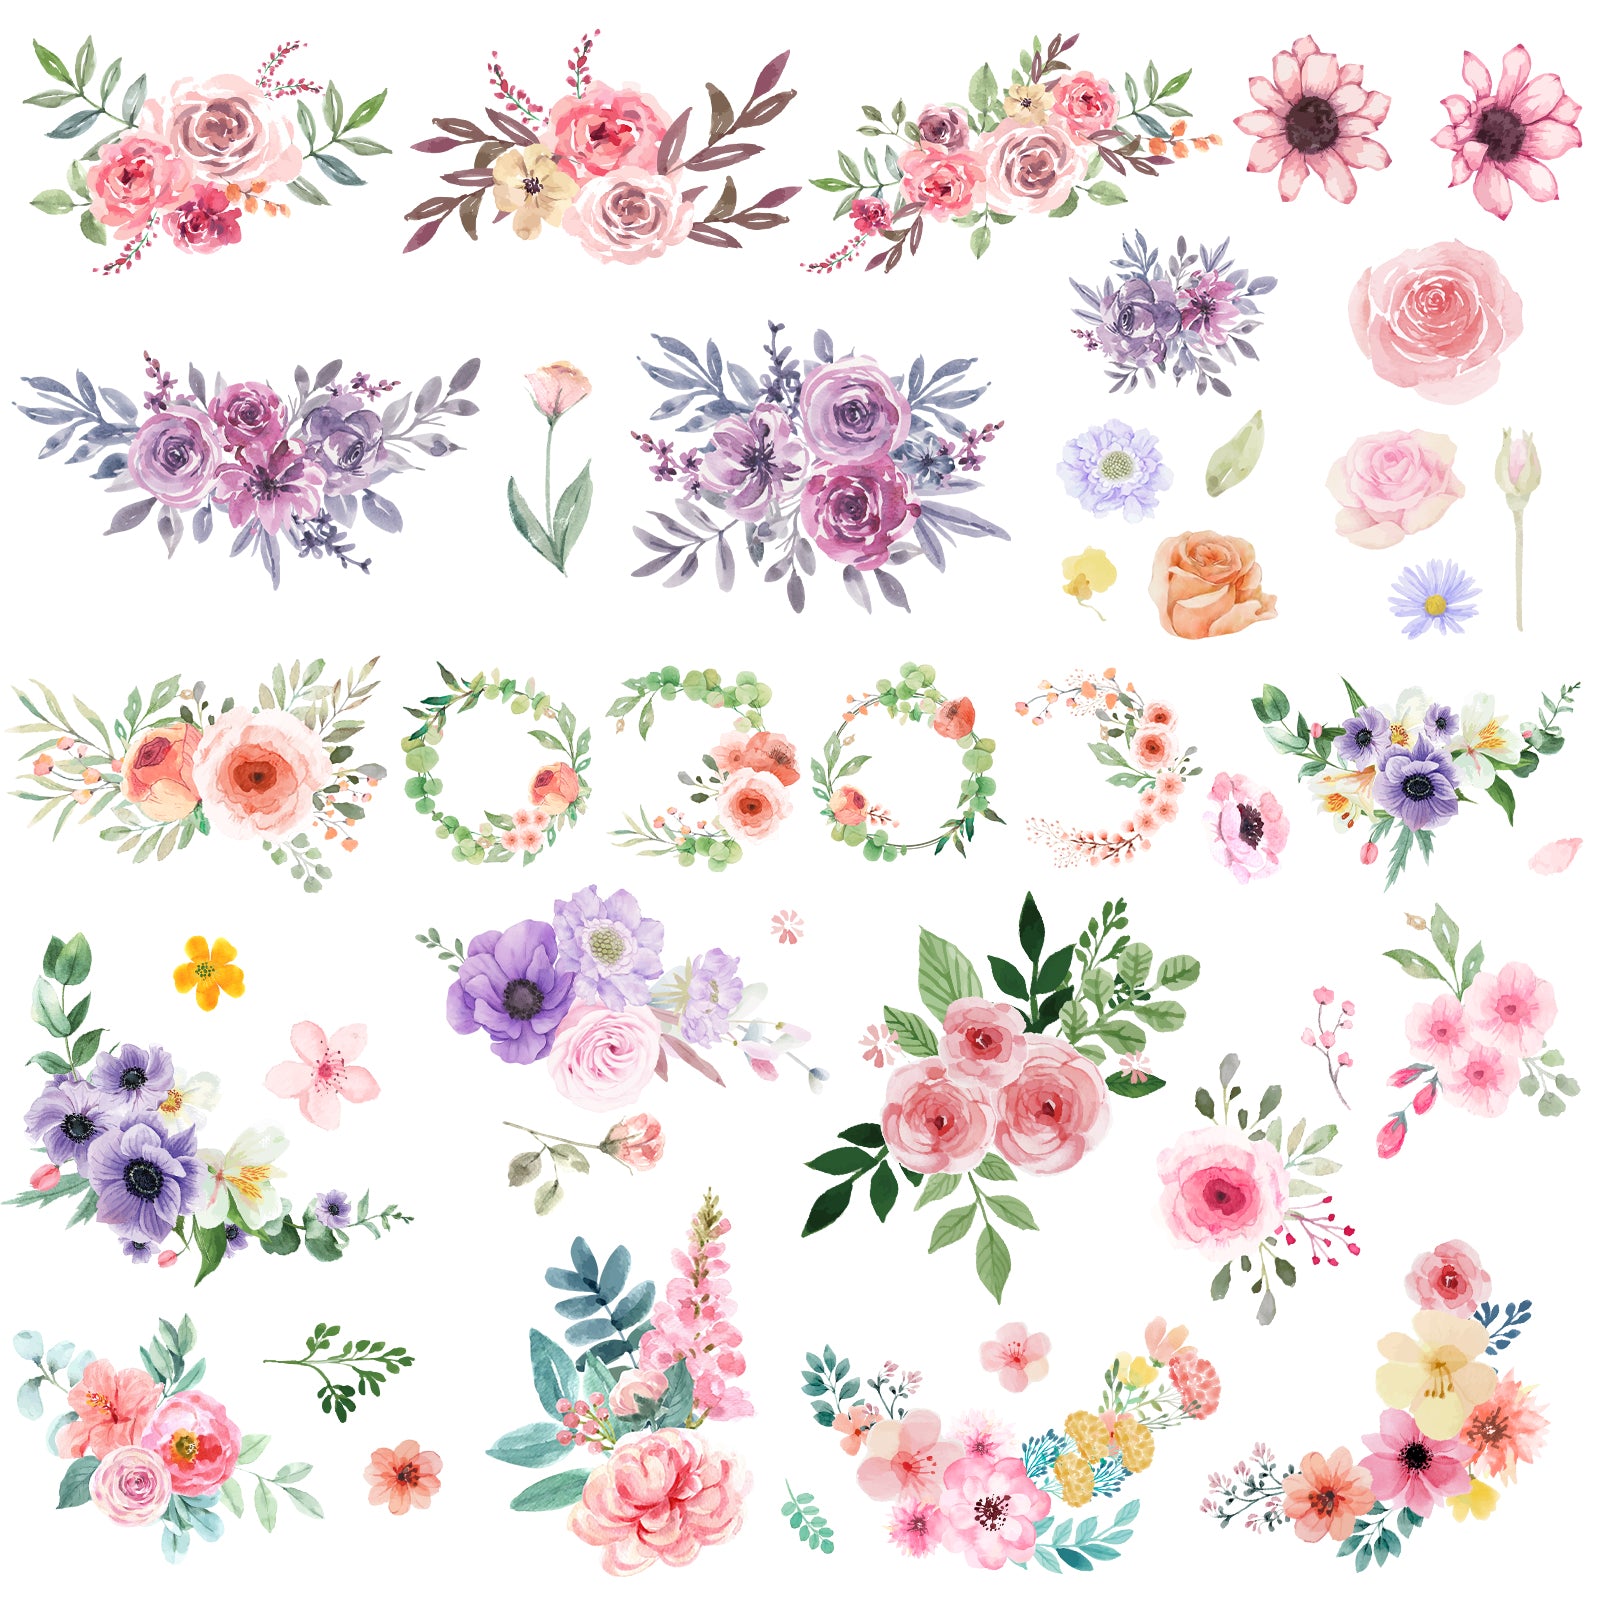 watercolor flowers bouquet tattoo designs removable temporary fake tattoo stickers for women and teen girls